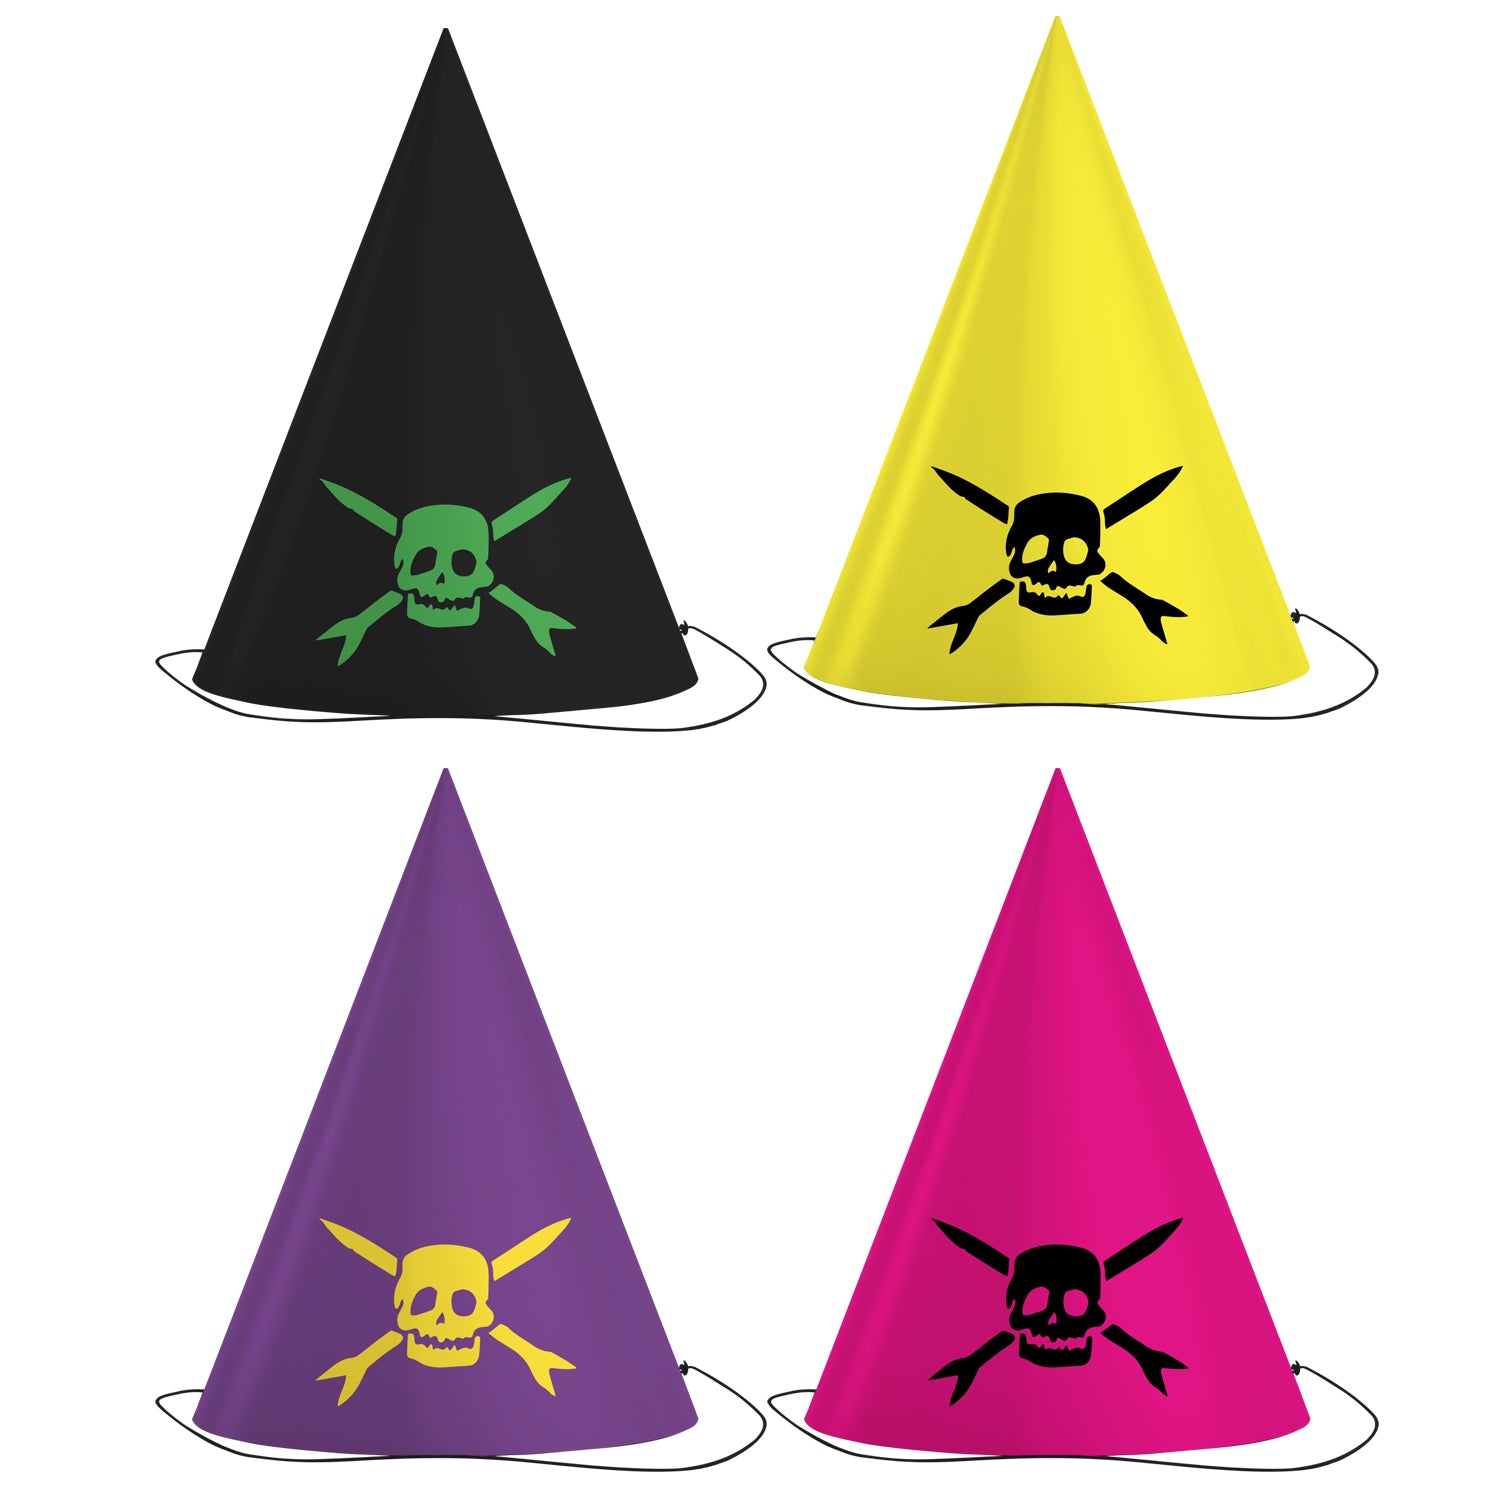 Image of four party hats with the teenage bottlerocket skull head with cross arrows on it. One hat is black with the green logo, one is yellow with a black logo, another is purple with a yellow logo, and the fourth hat is pink with a black logo.